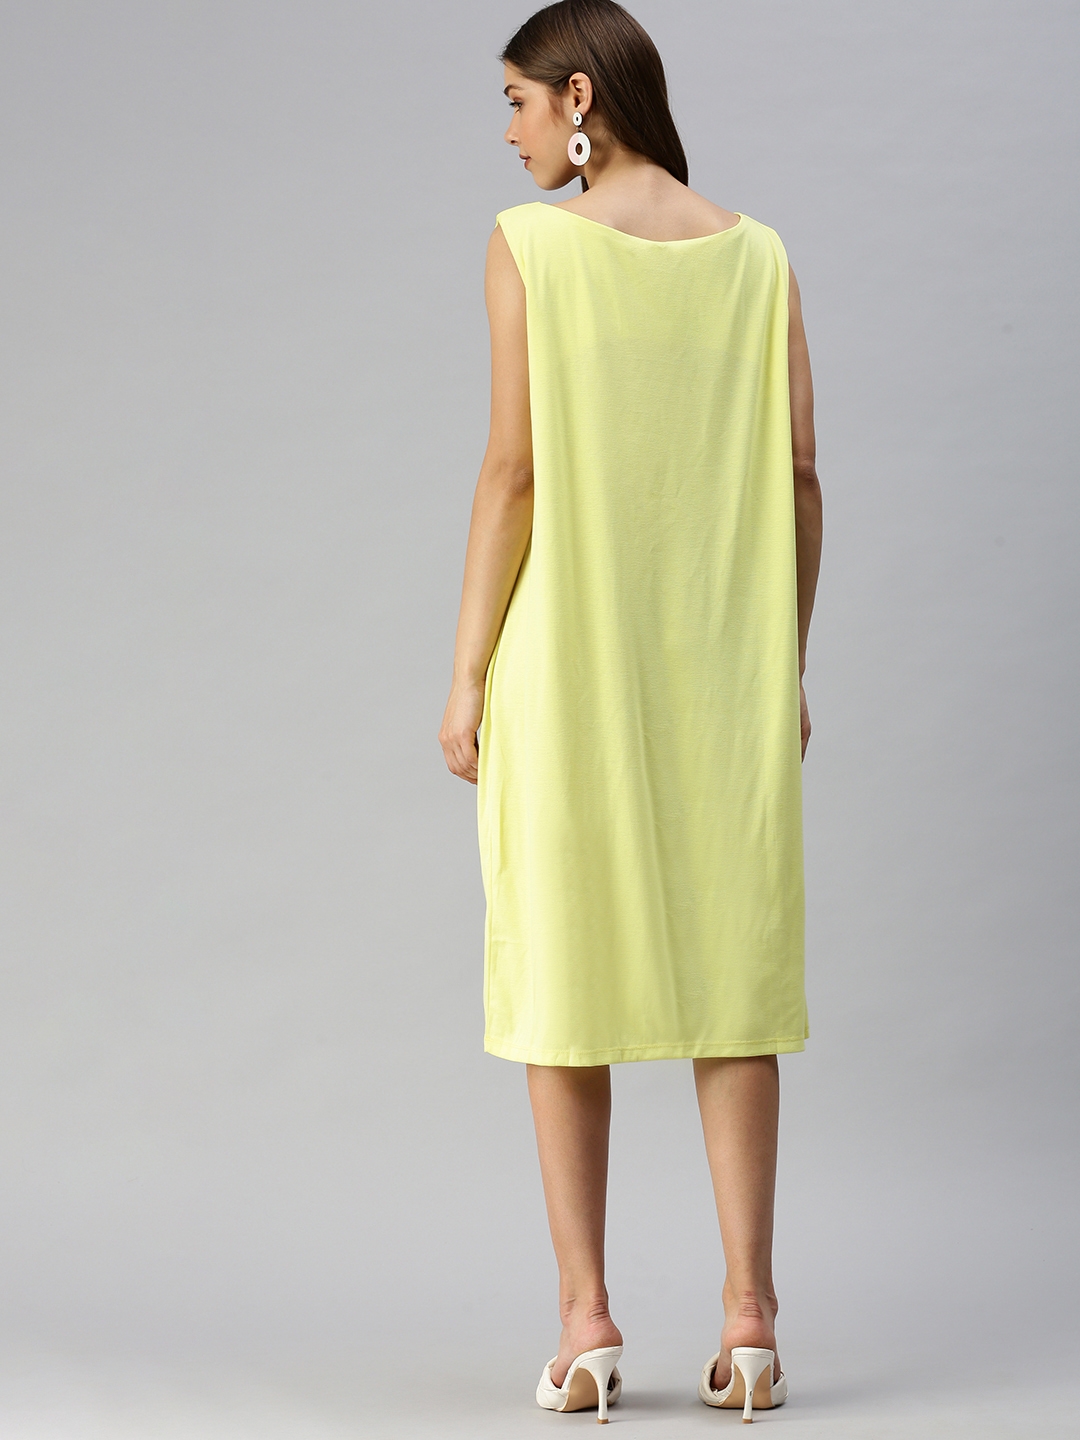 Showoff | SHOWOFF Women Yellow Solid Round Neck Sleeveless Knee length T-shirt Dress 3